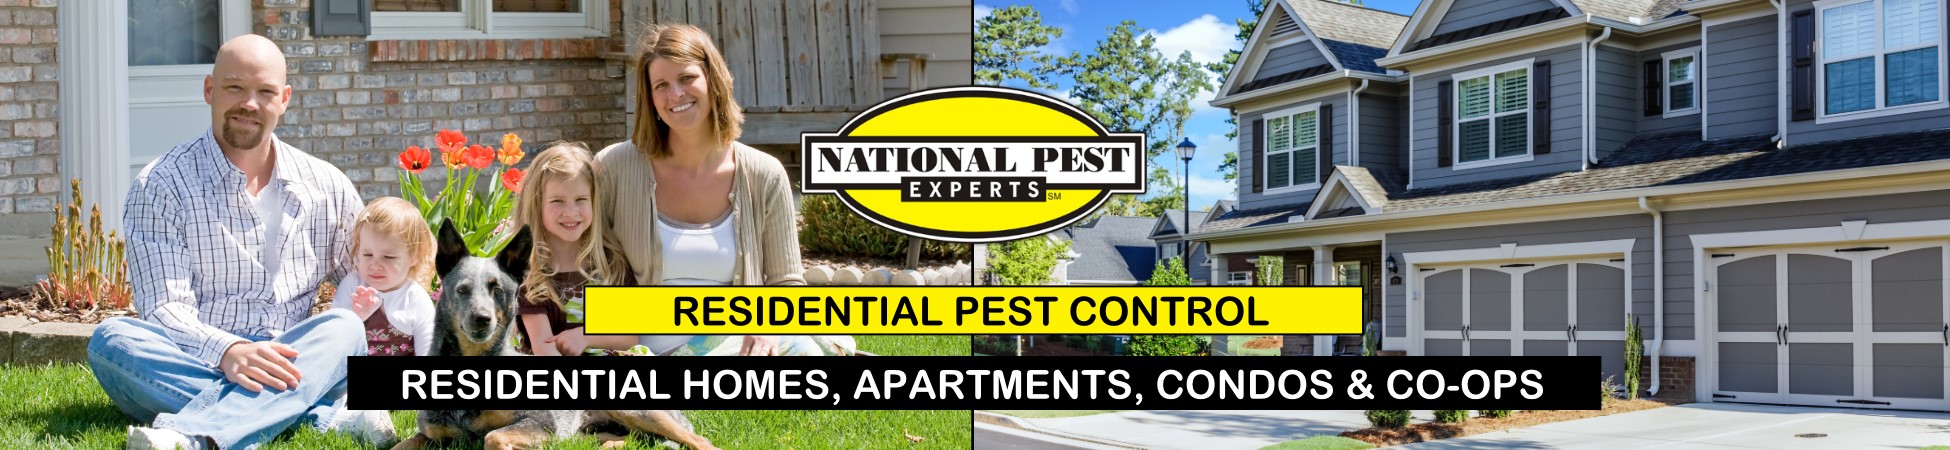 National Pest Experts - Residential exterminating and pest control in Laurel Hollow, NY